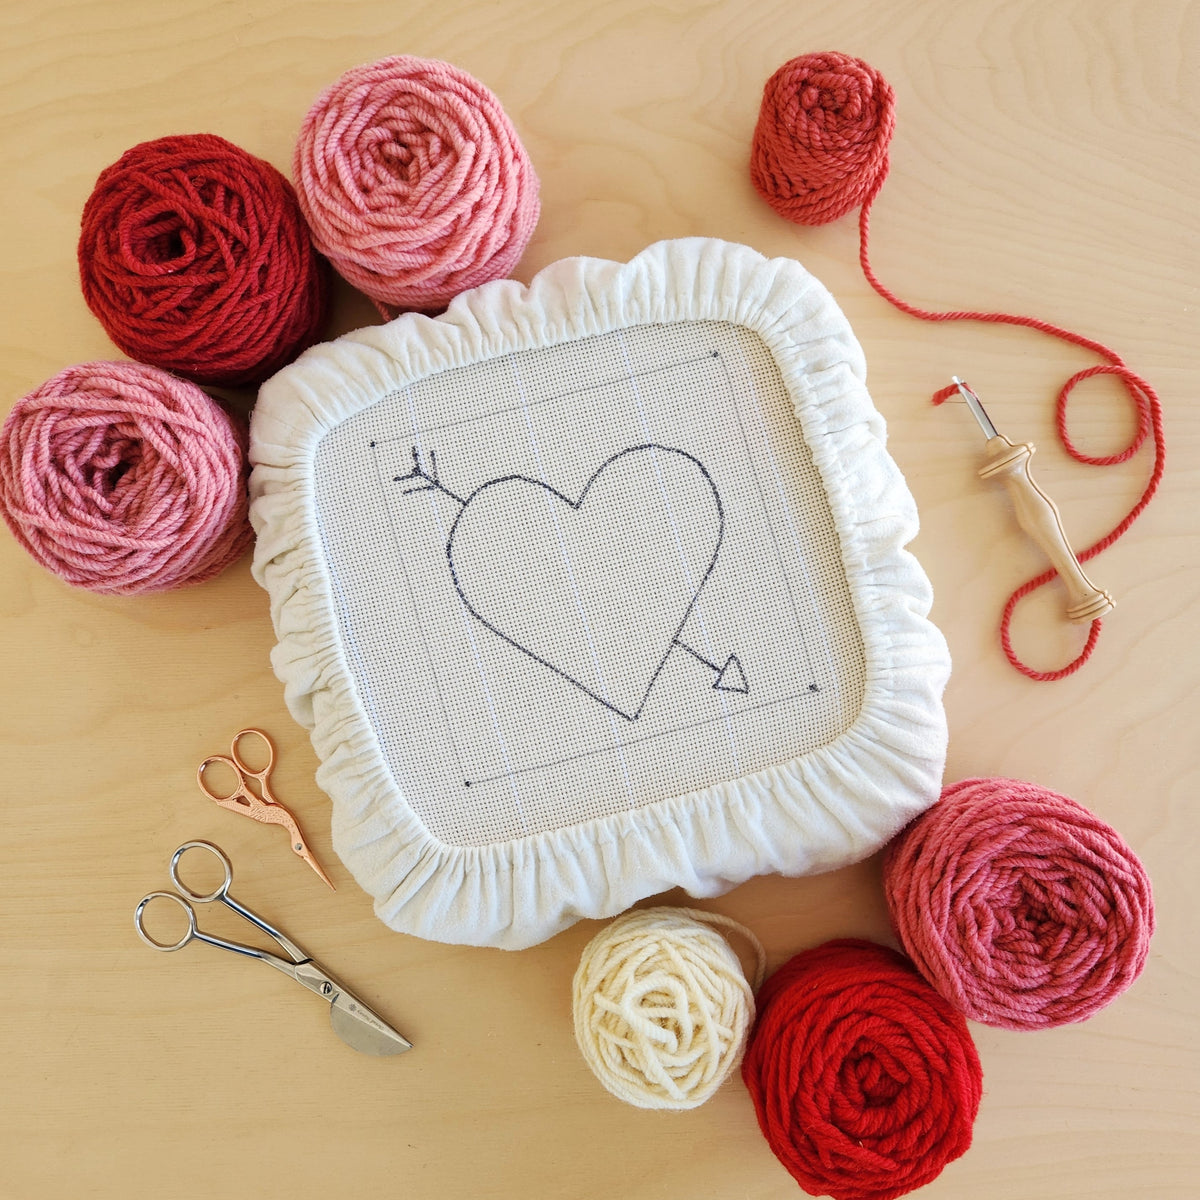 Valentines Heart - PDF Punch Needle Pattern by Punch Needle World